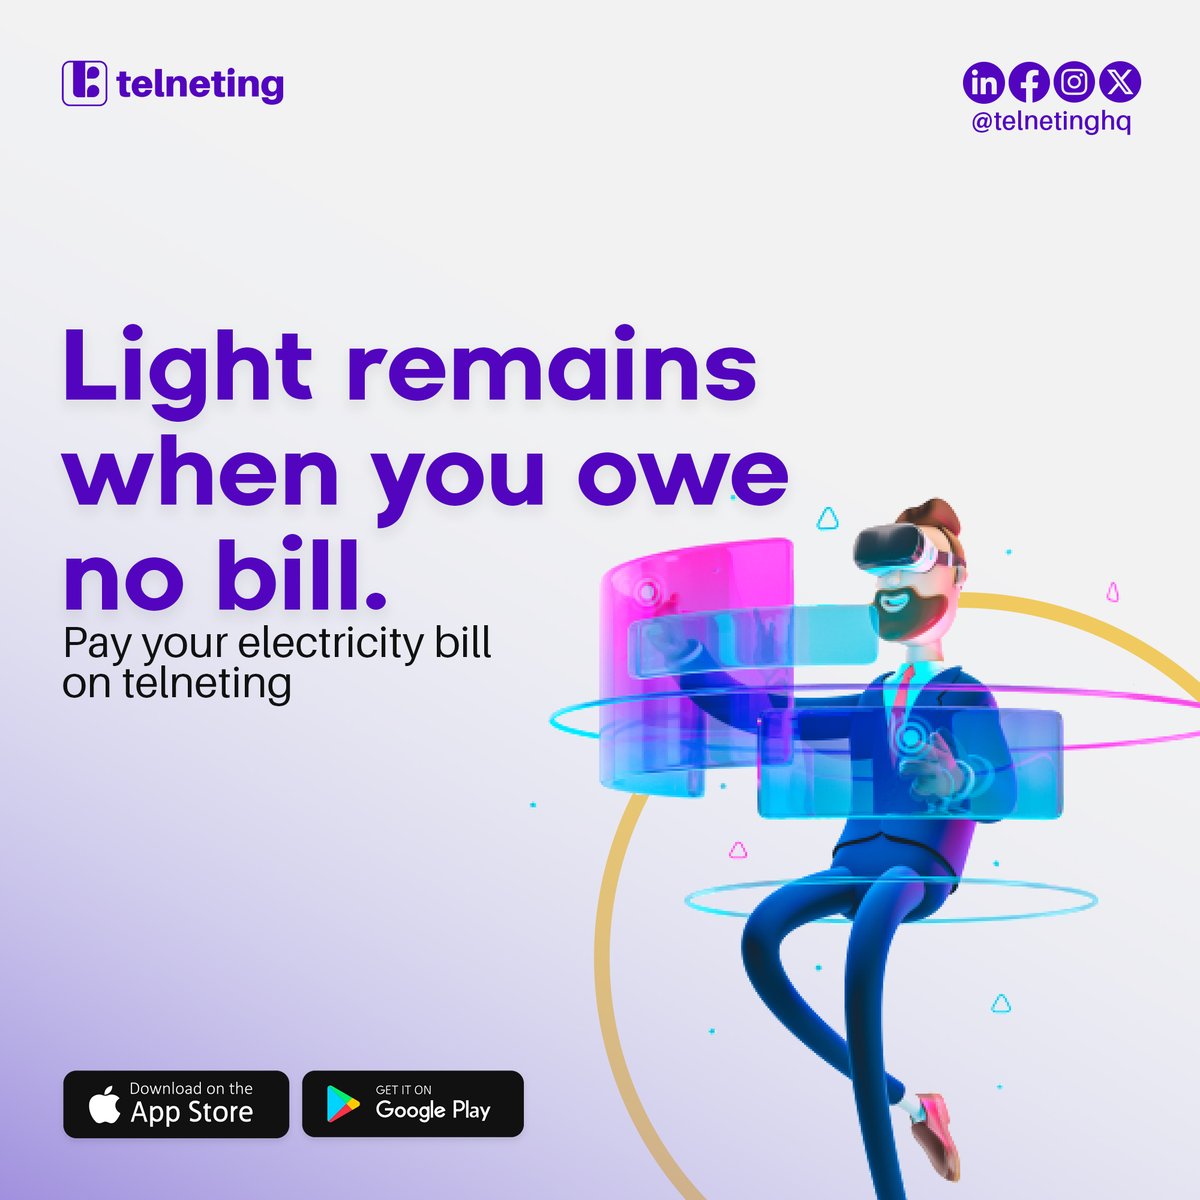 With the Telneting app, paying your electricity bill is easy.

Say goodbye to darkness and hello to light.

Download our app now and keep the light shining.

.
.
.

#Telneting #ElectricityBill #Convenience #IKEDC